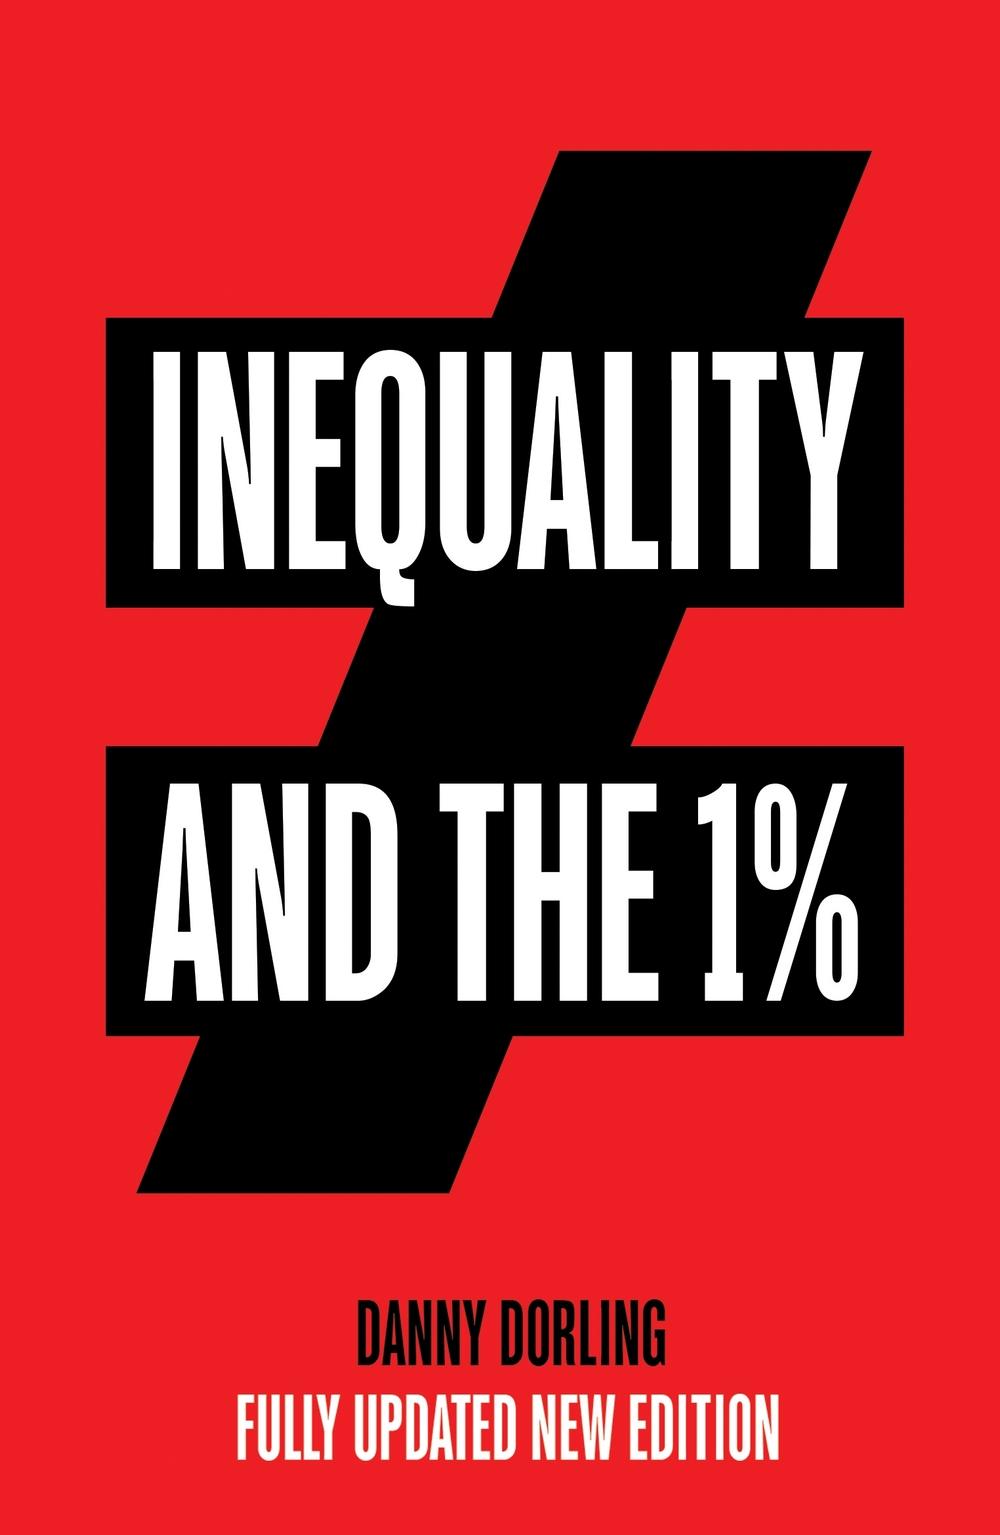 Inequality and the 1% - Danny Dorling